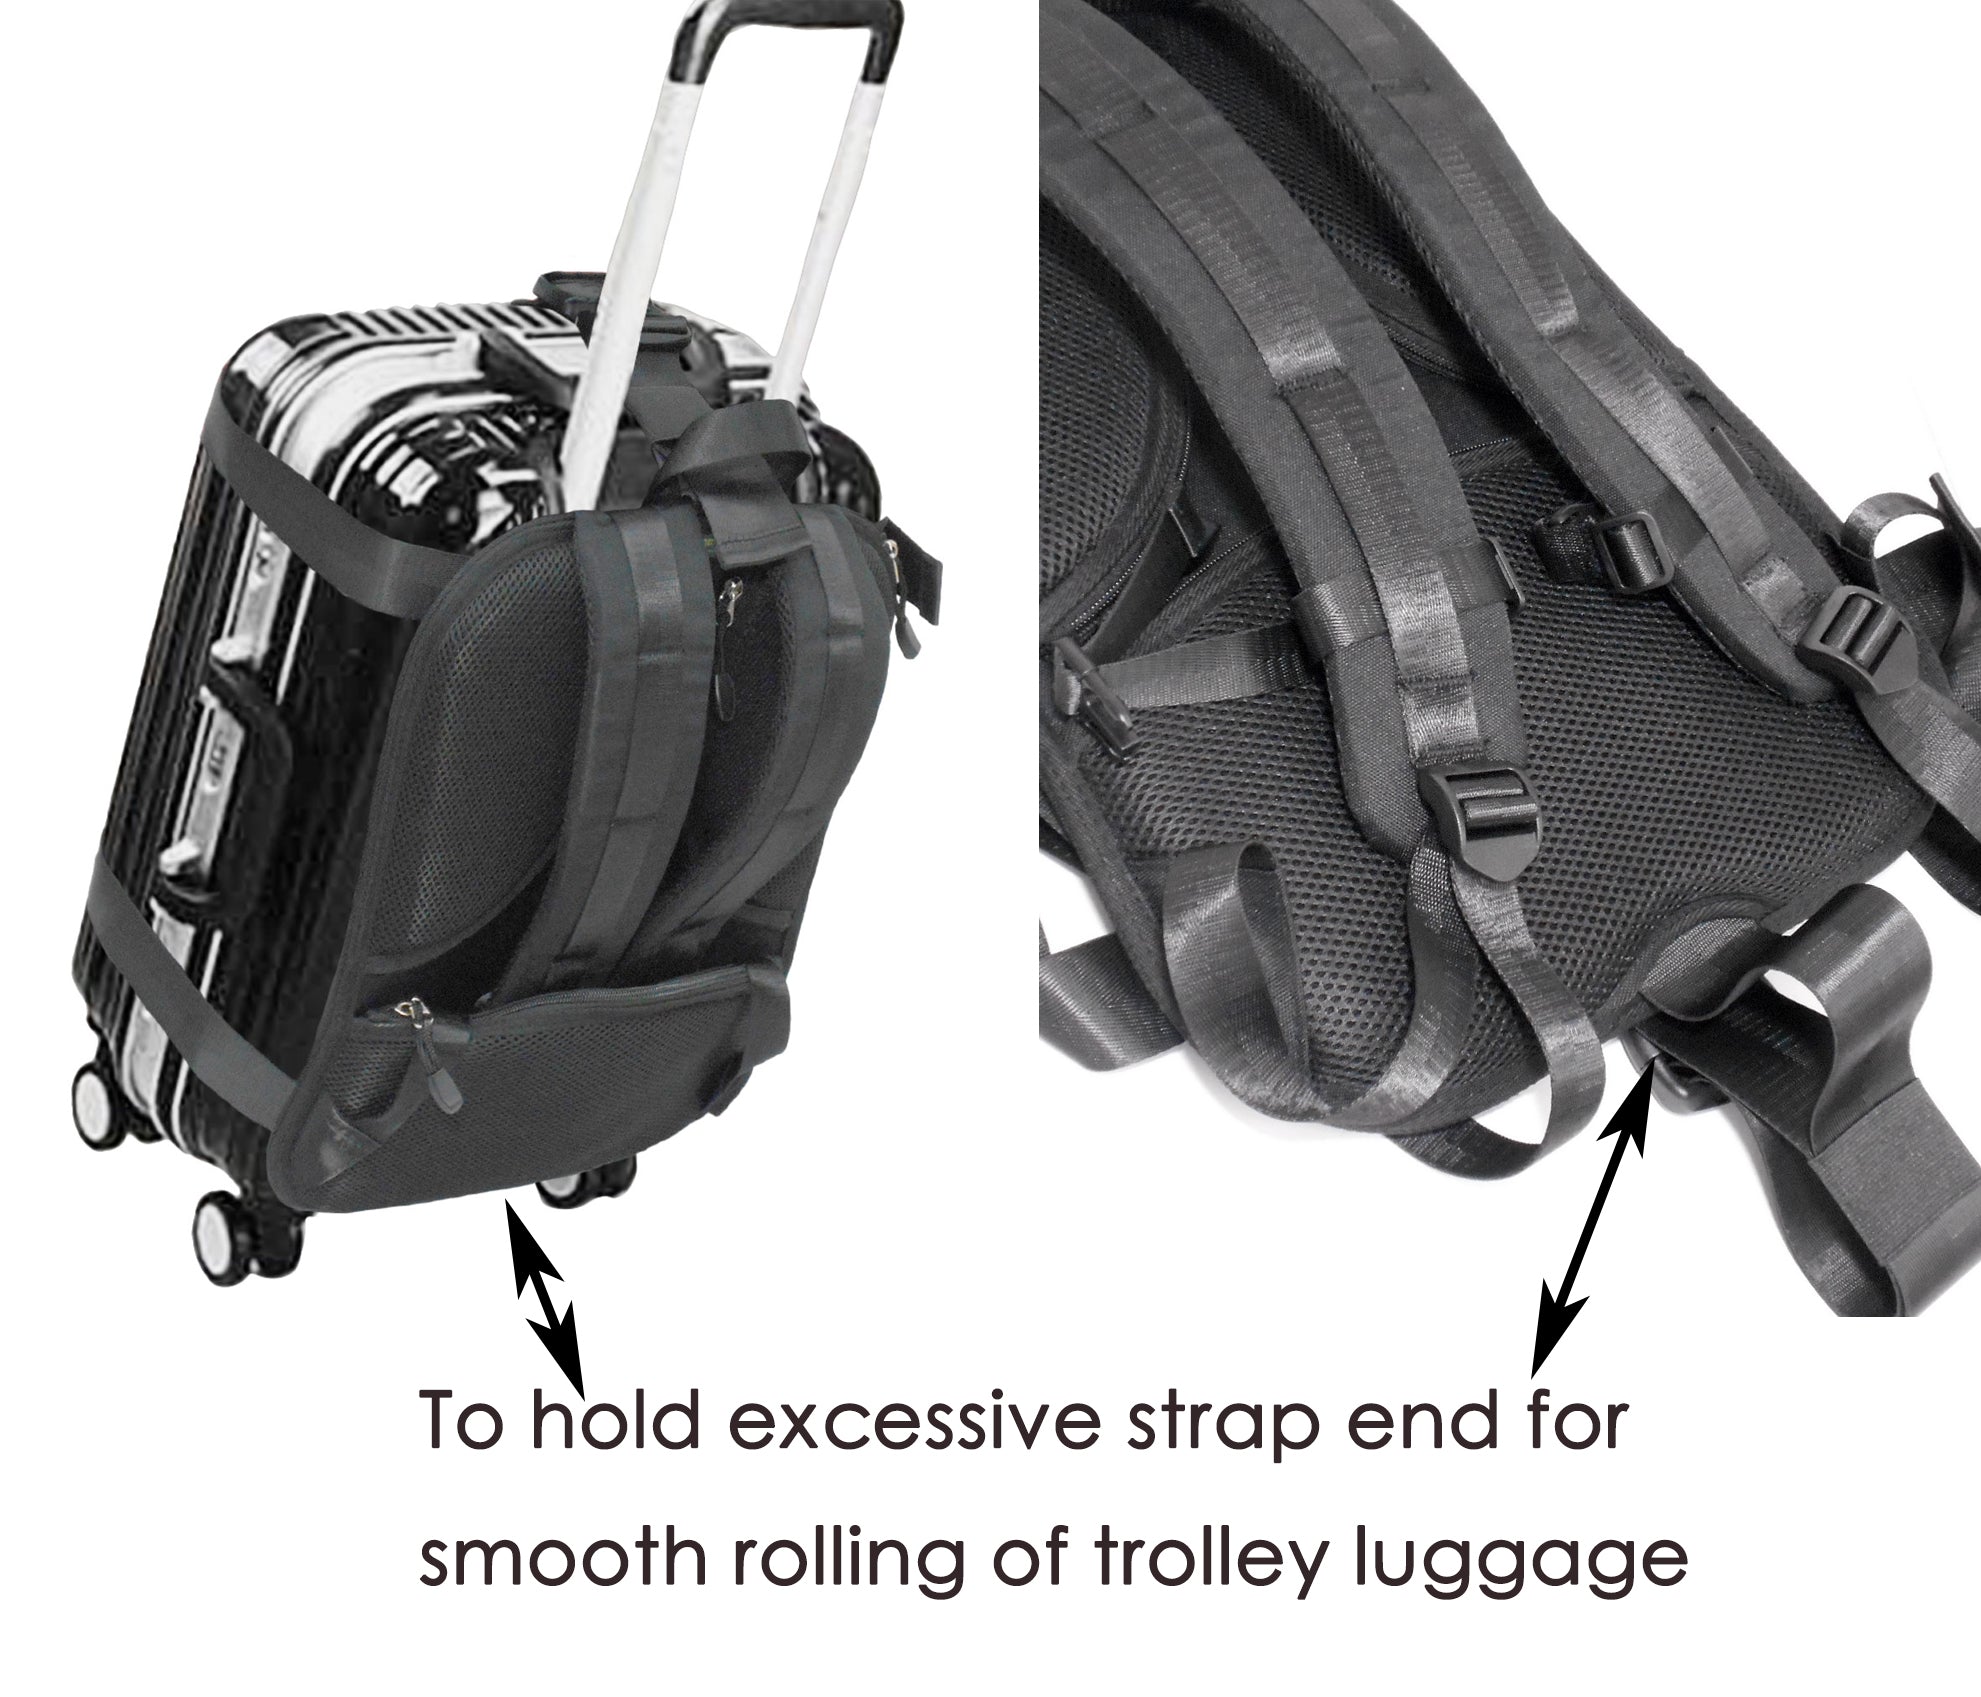 Cabin Luggage Harness in black, Travel accessories